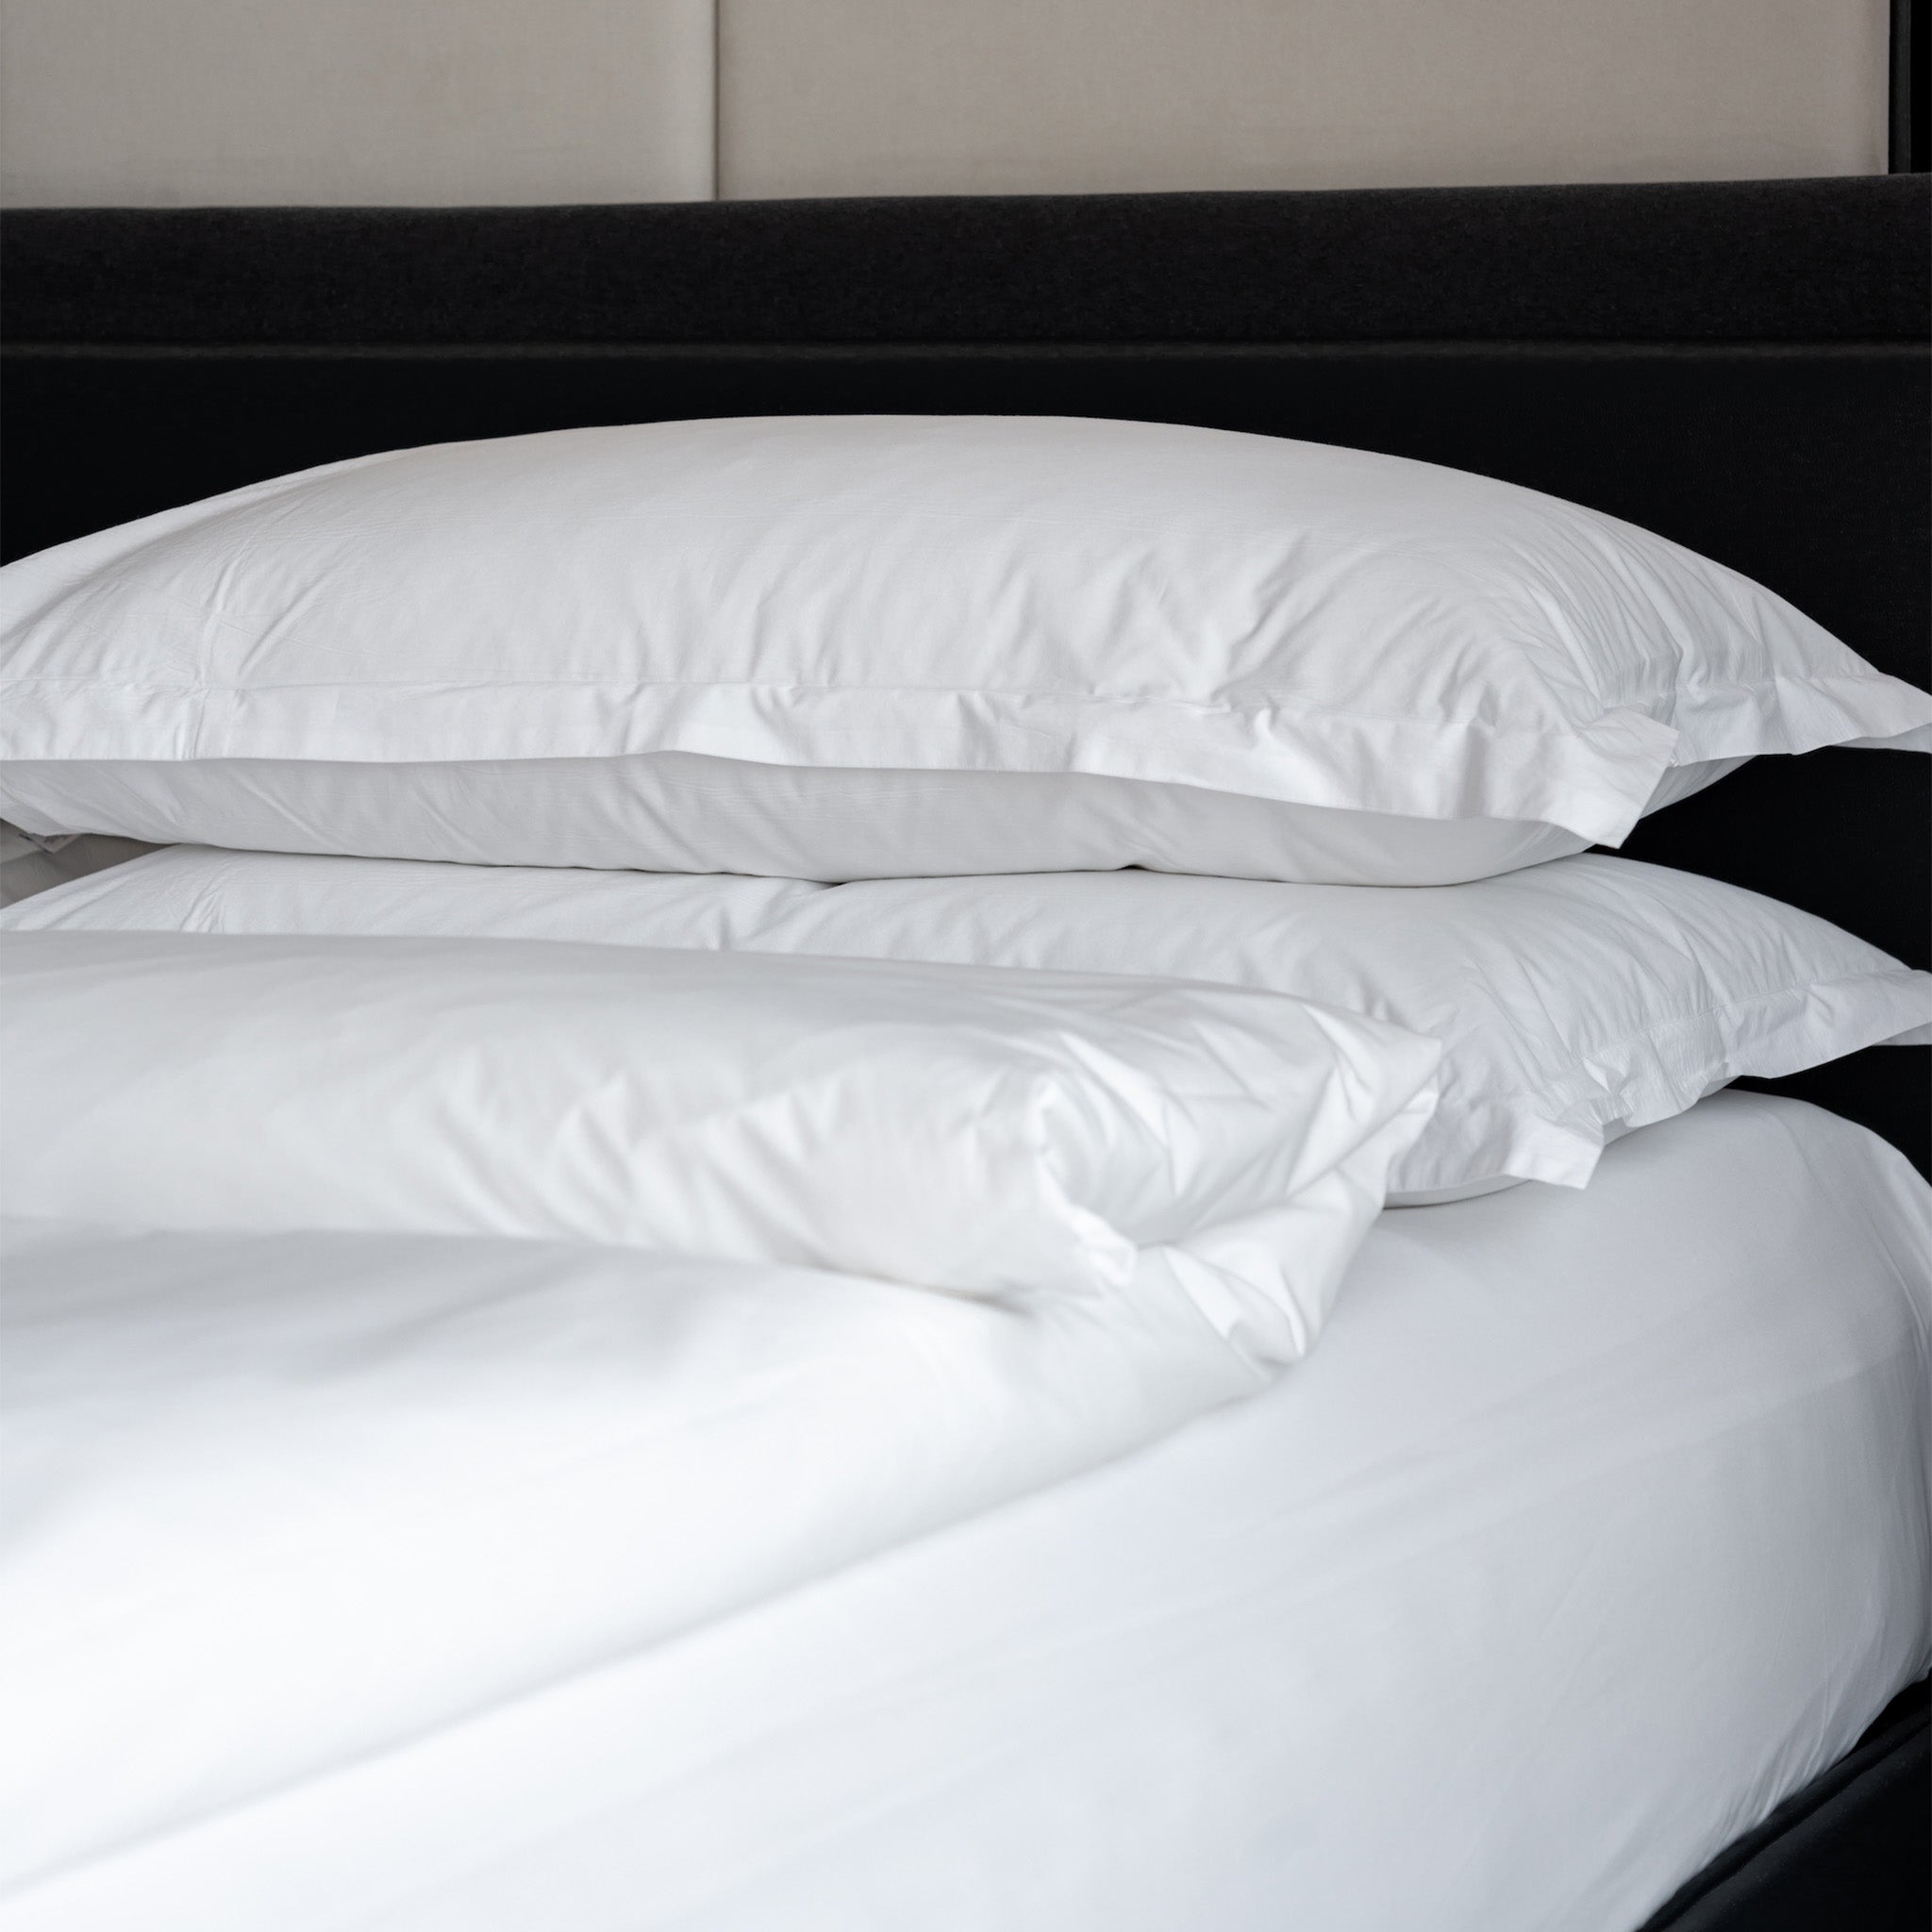 Equinox Hotels Bed Linen Fitted Sheet – The Shop at Equinox